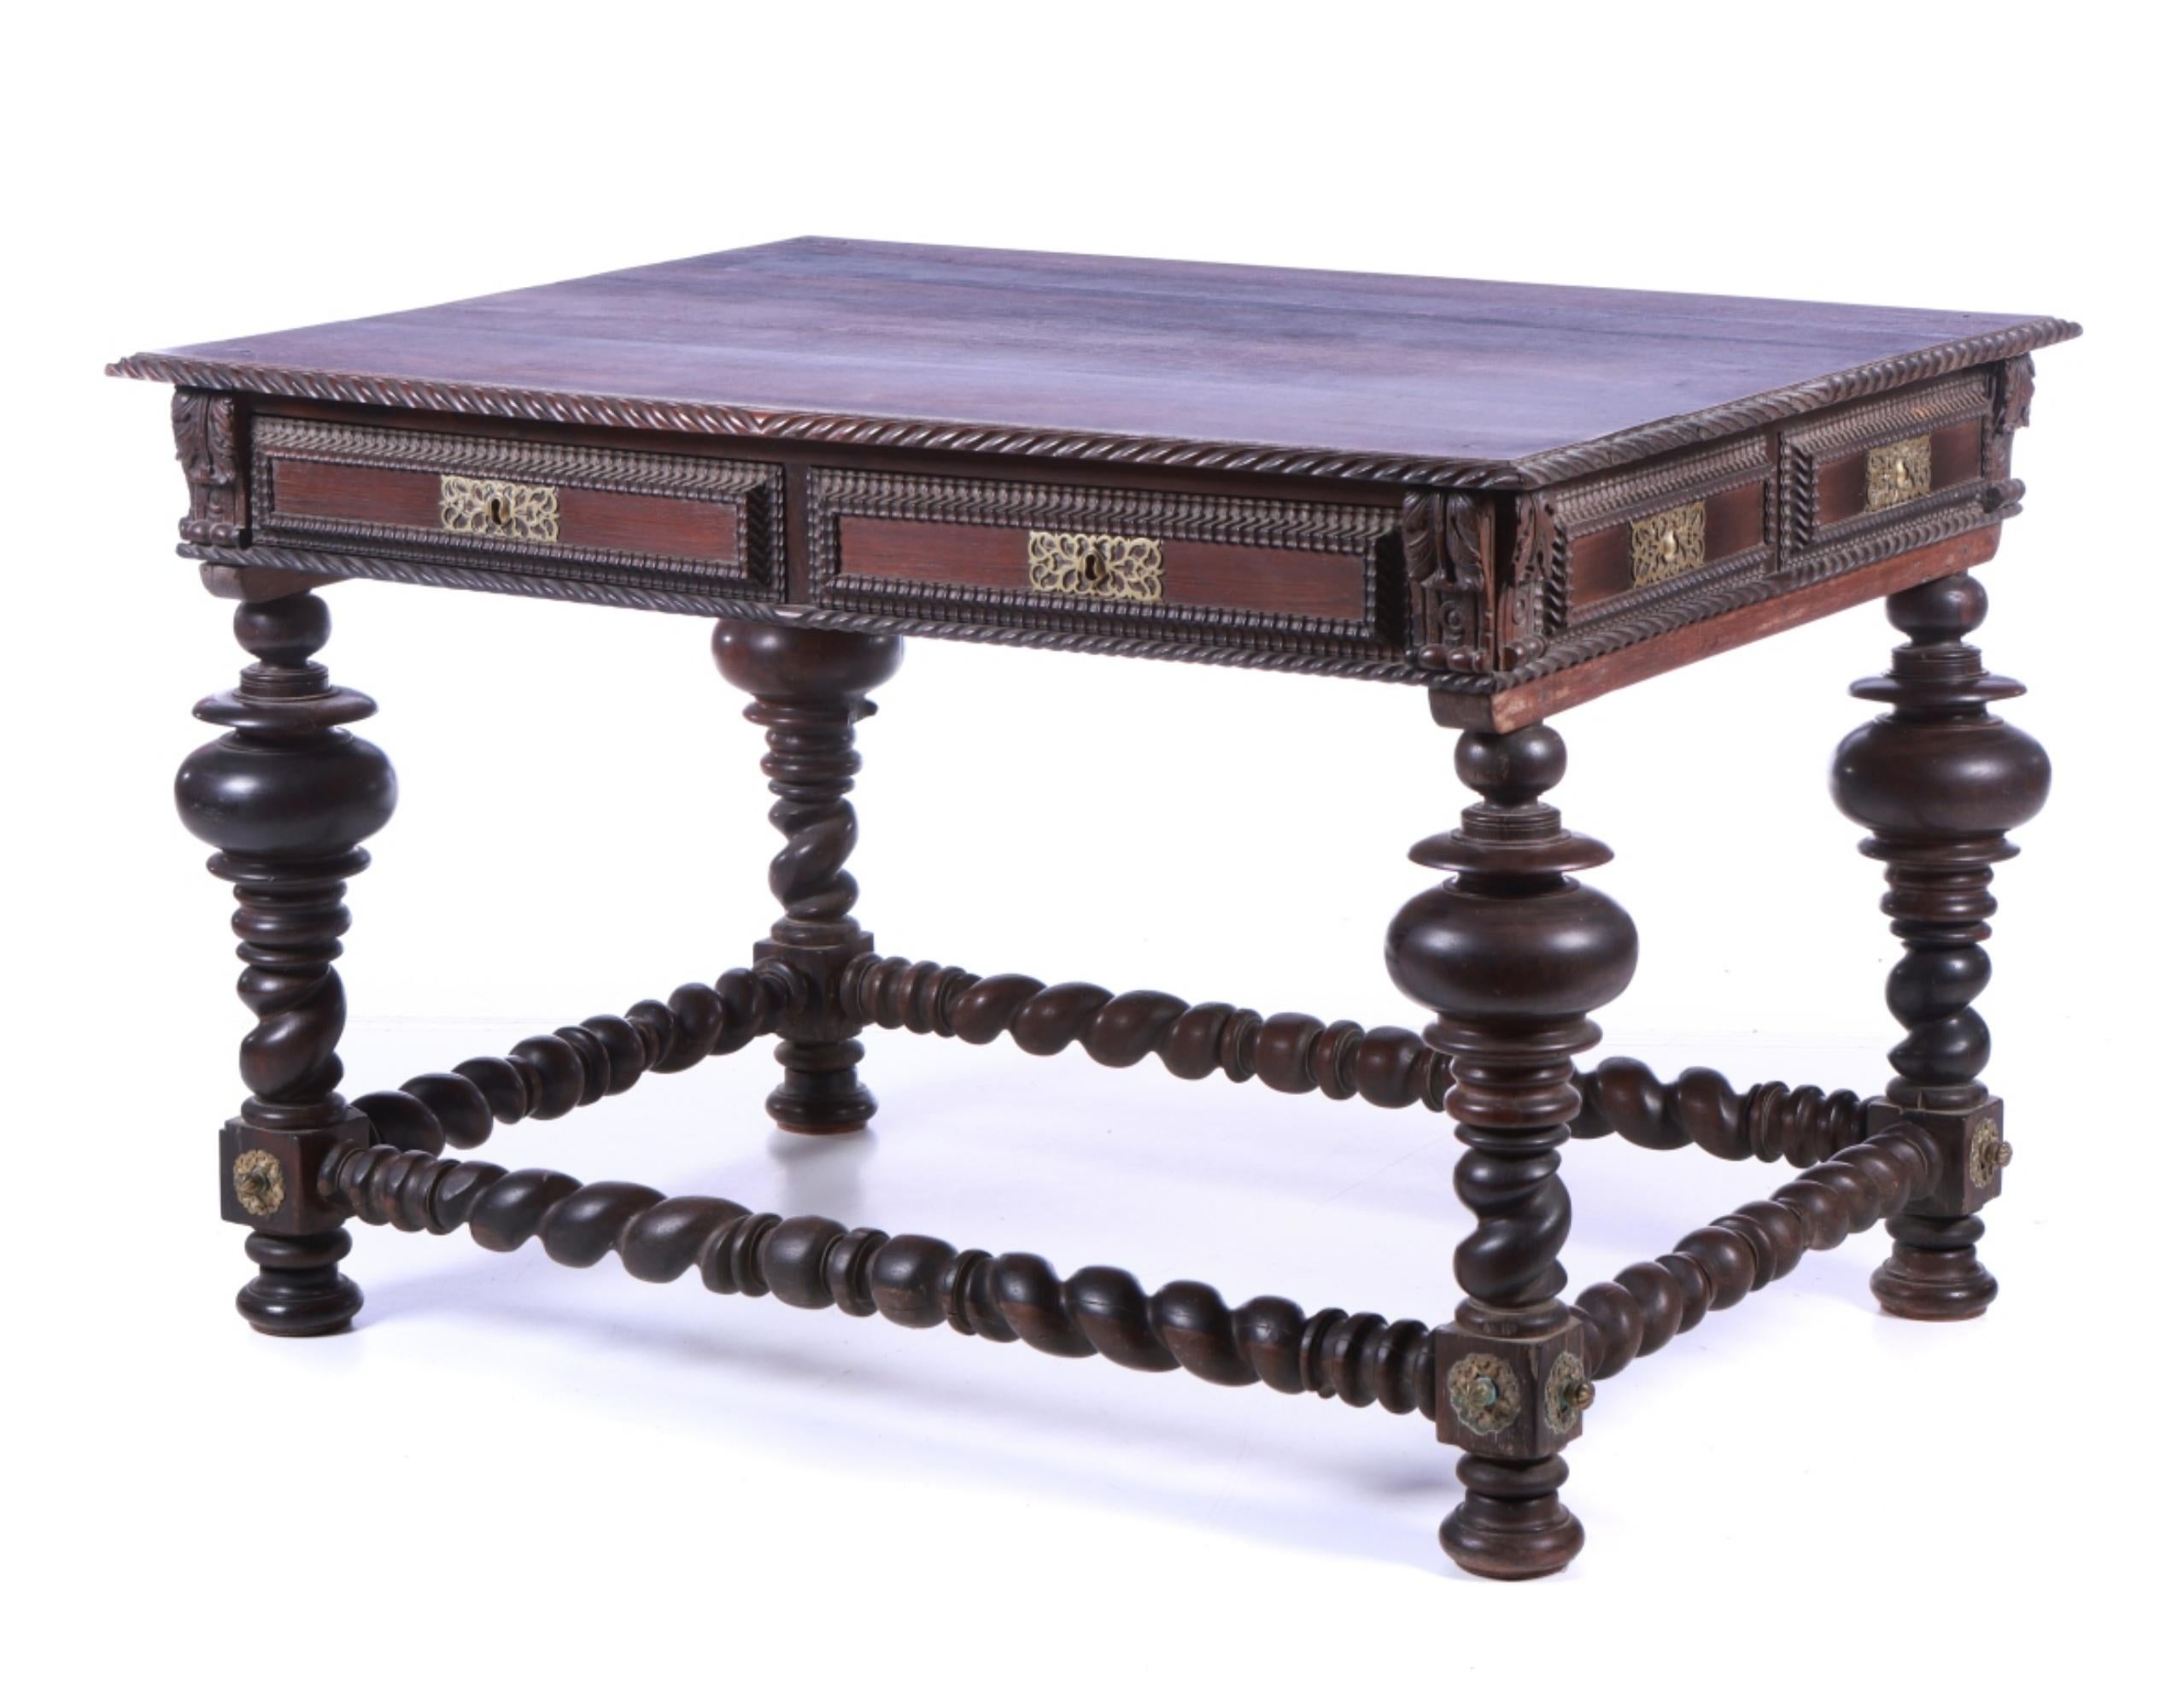 Portuguese, 19th Century. in Brazilian rosewood, twisted and shaken. Box with two drawers simulating six, turned legs and bars. Fittings in gilt bronze, scalloped. Small defects. 
Dim.: 85 x 127 x 100 cm.